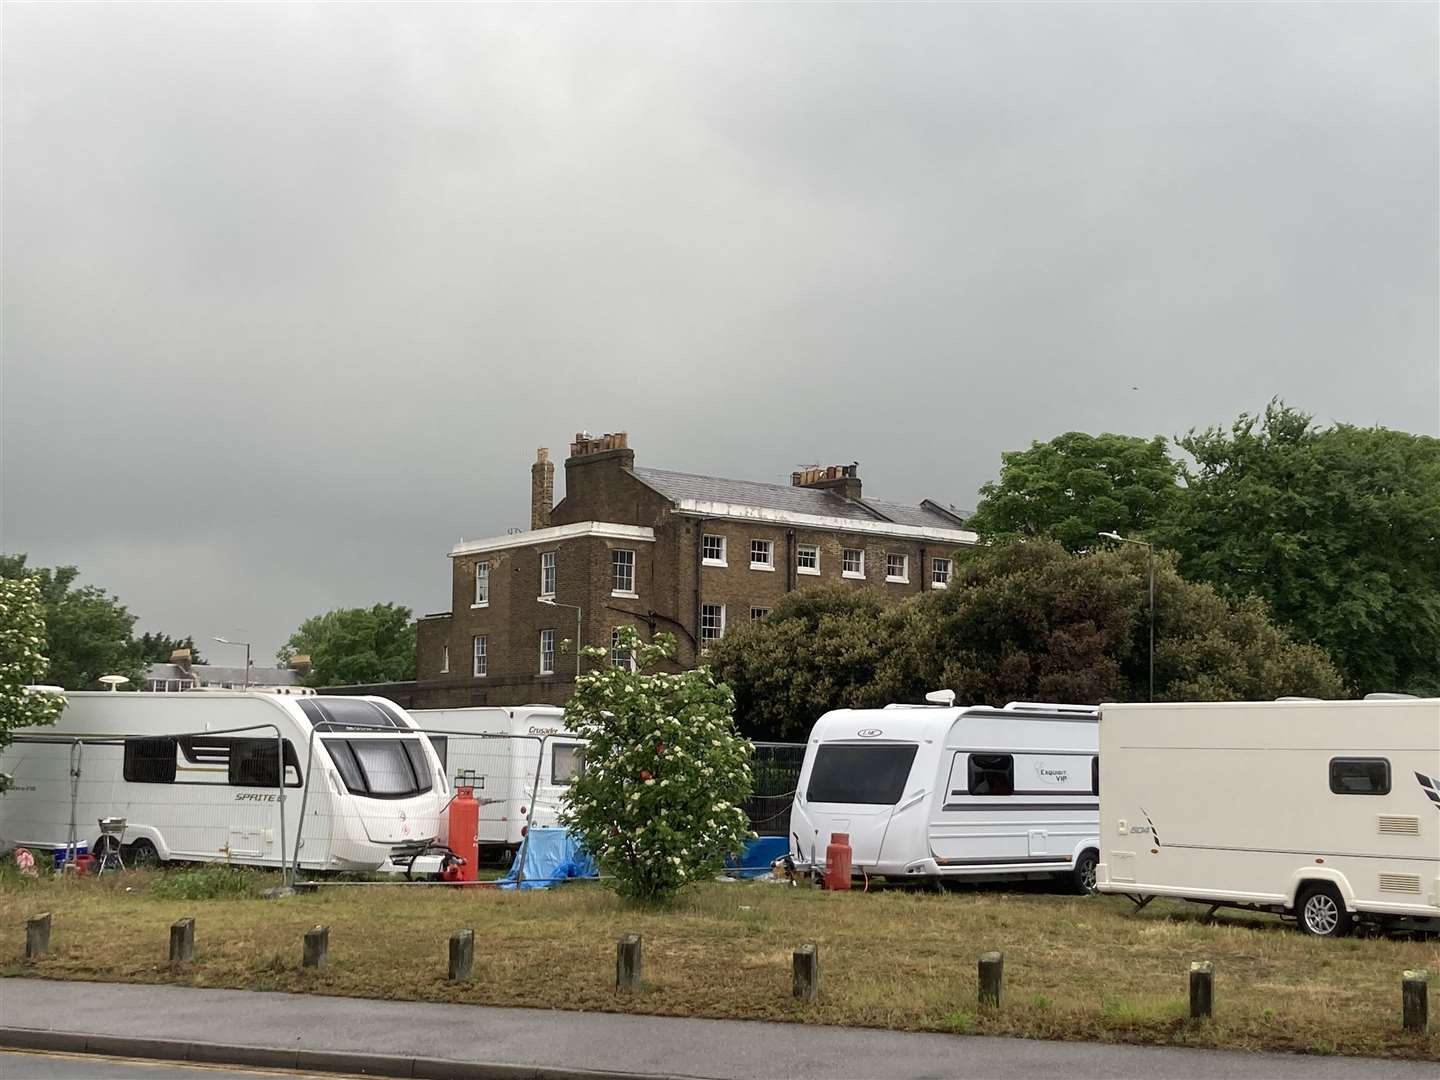 Travellers camped at this site at the entrance to Blue Town, Sheppey, next to Naval Terrace